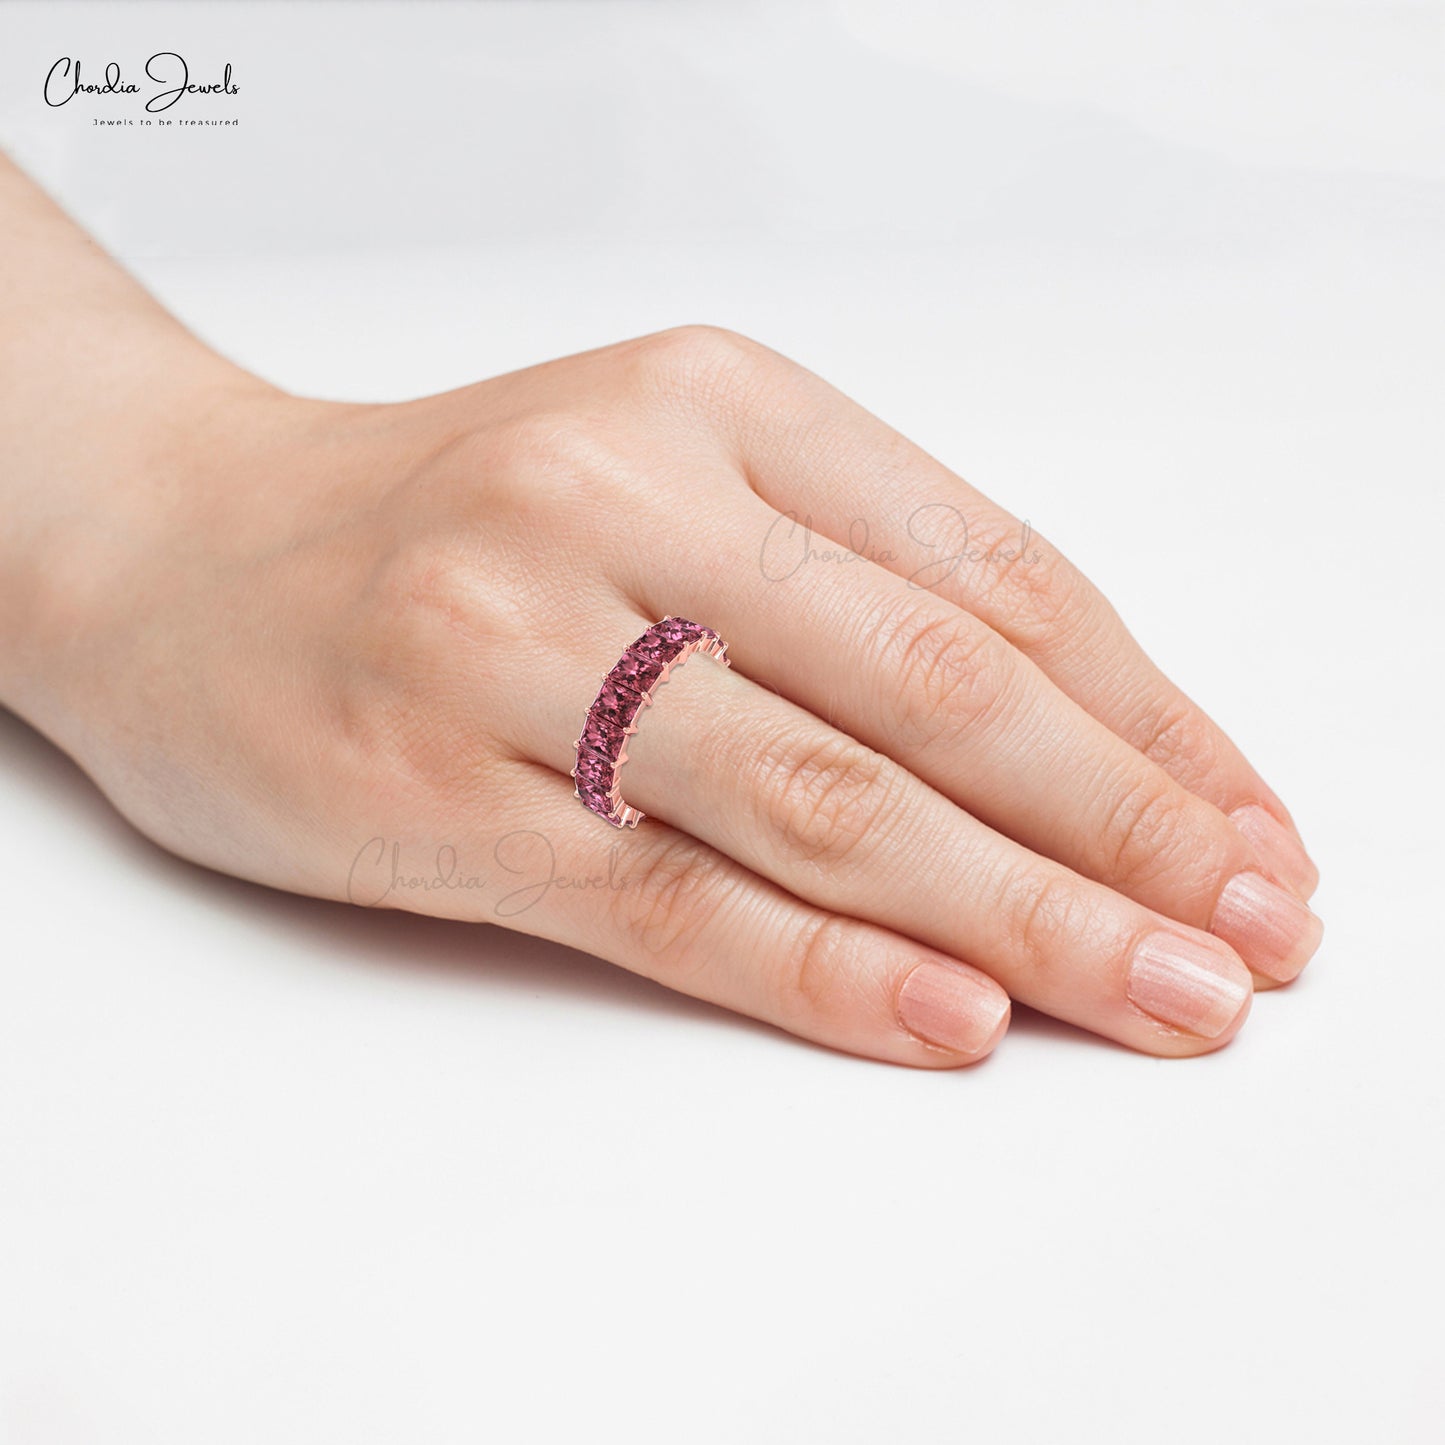 4.8 Carat Natural Pink Tourmaline Eternity Gemstone Band, 14k Solid Gold Band Ring For Women